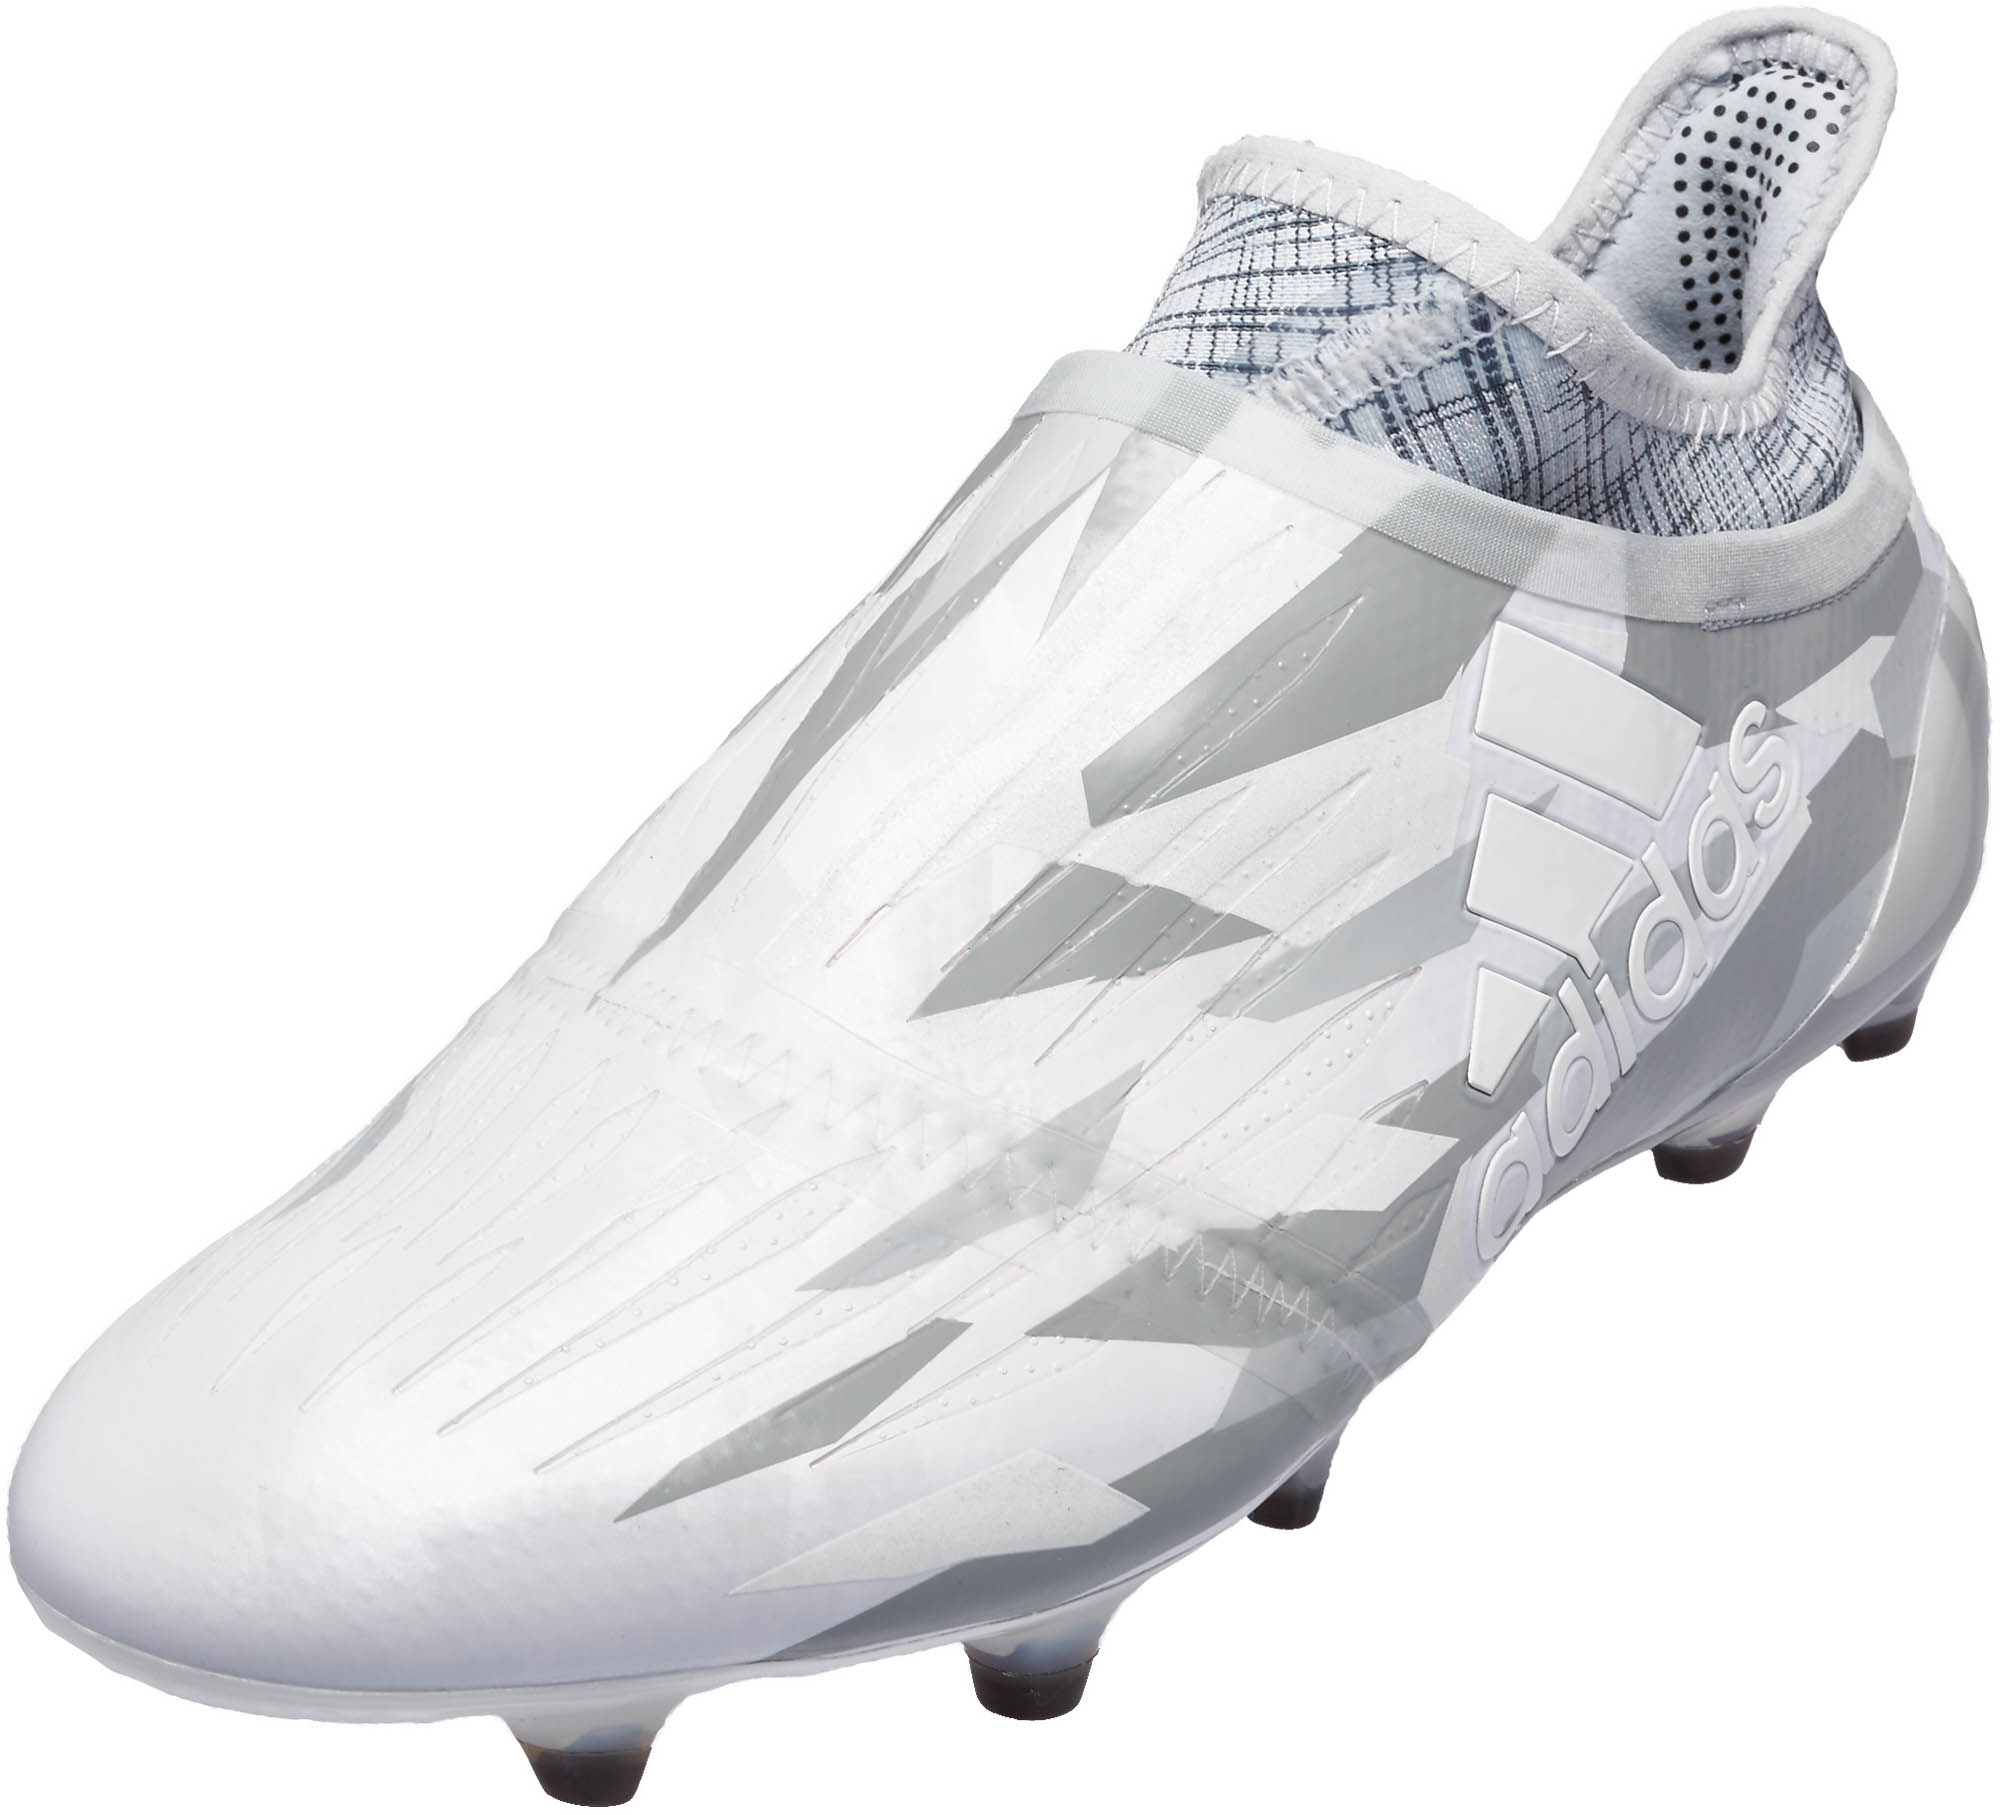 Special offer > adidas soccer cleats near me, Up to 71% OFF